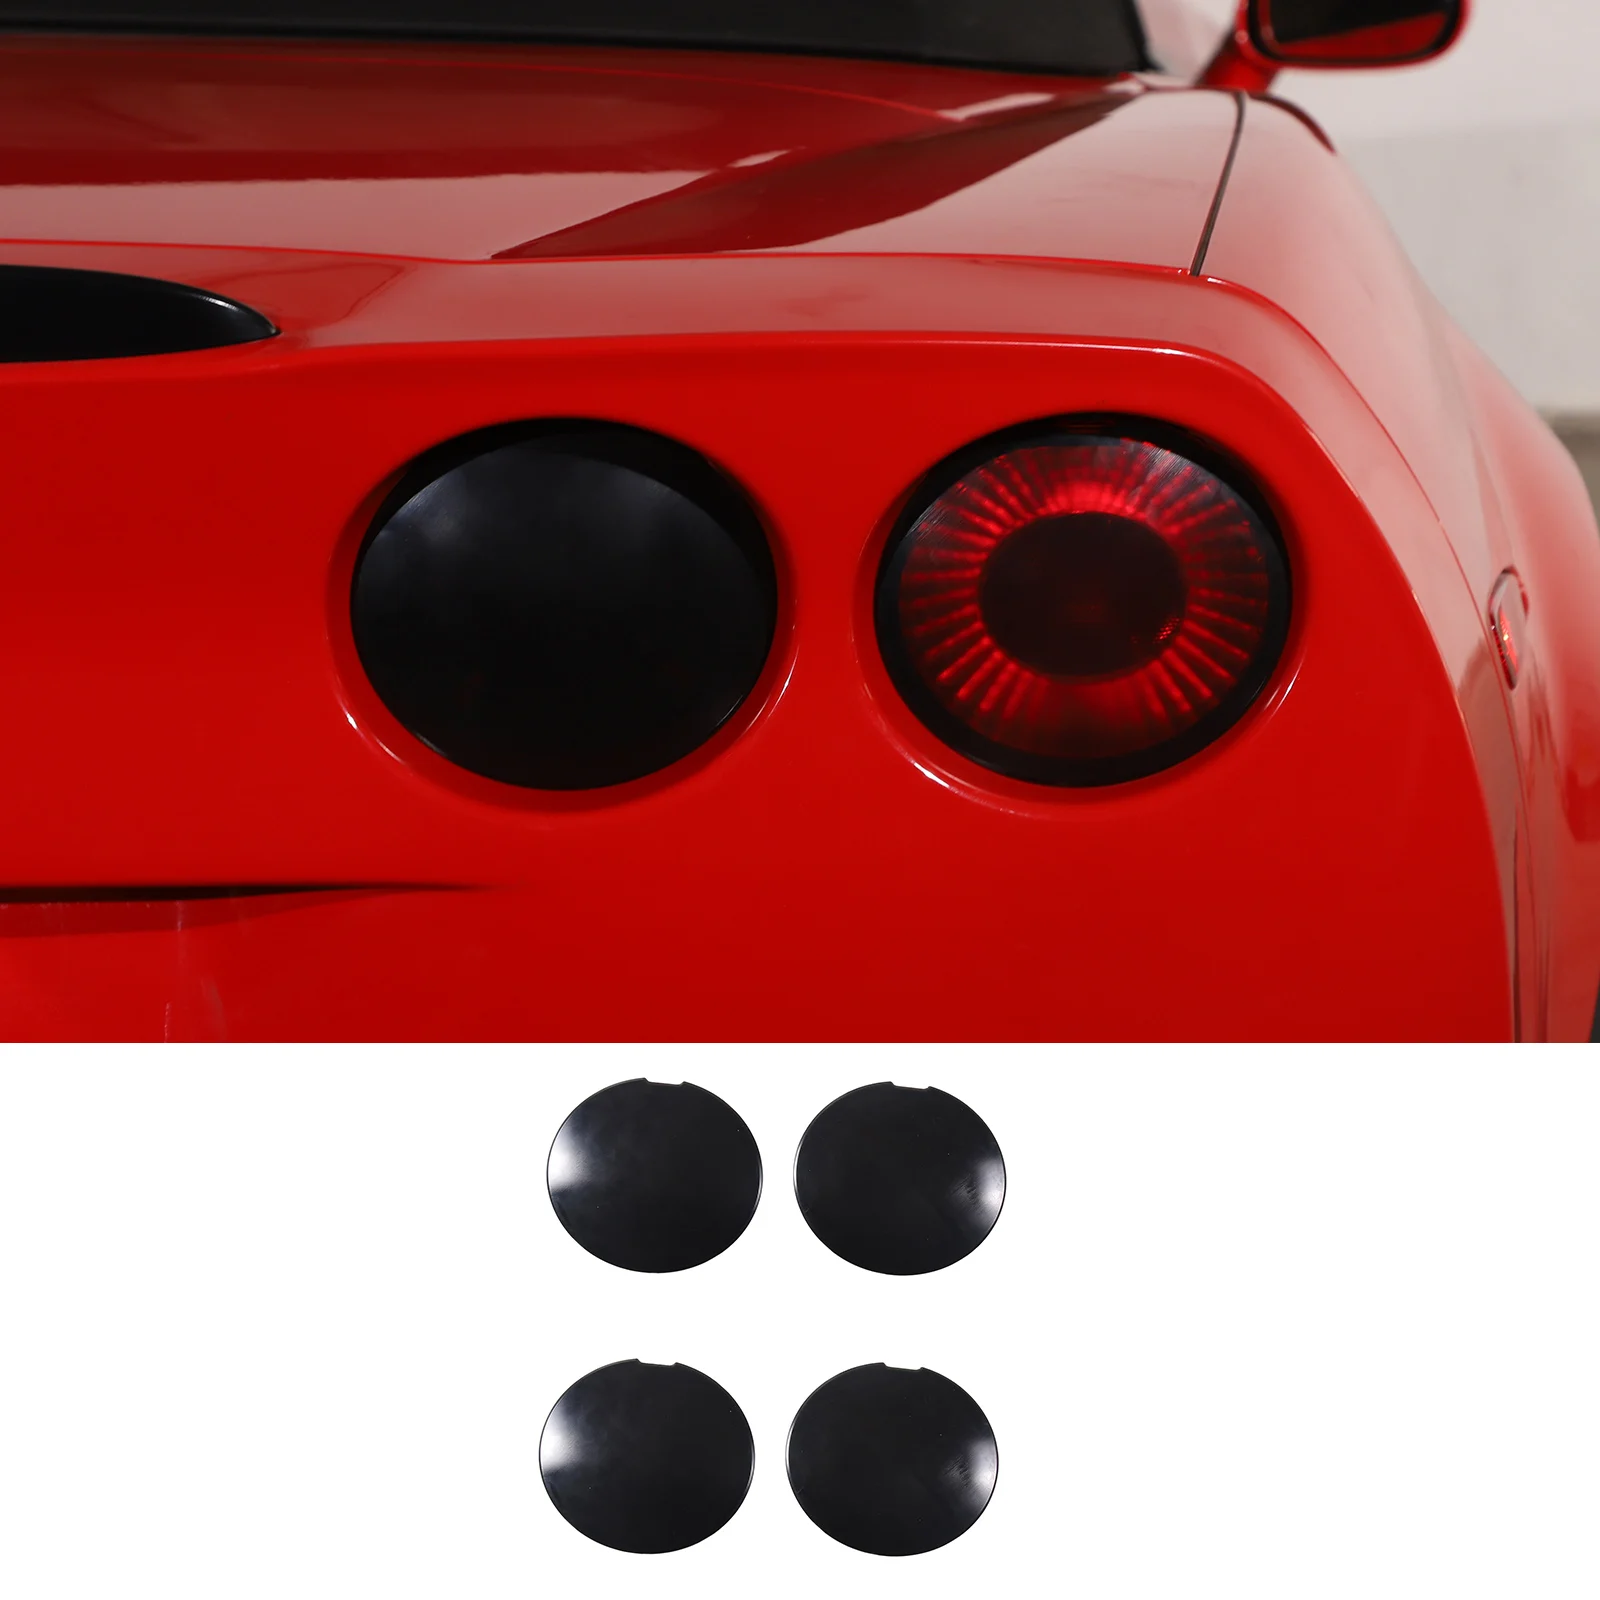 

ABS Smoked Lamp Car Tail Light Rear Stop Brake Light for Chevrolet Corvette C6 05-13 Car Accessories